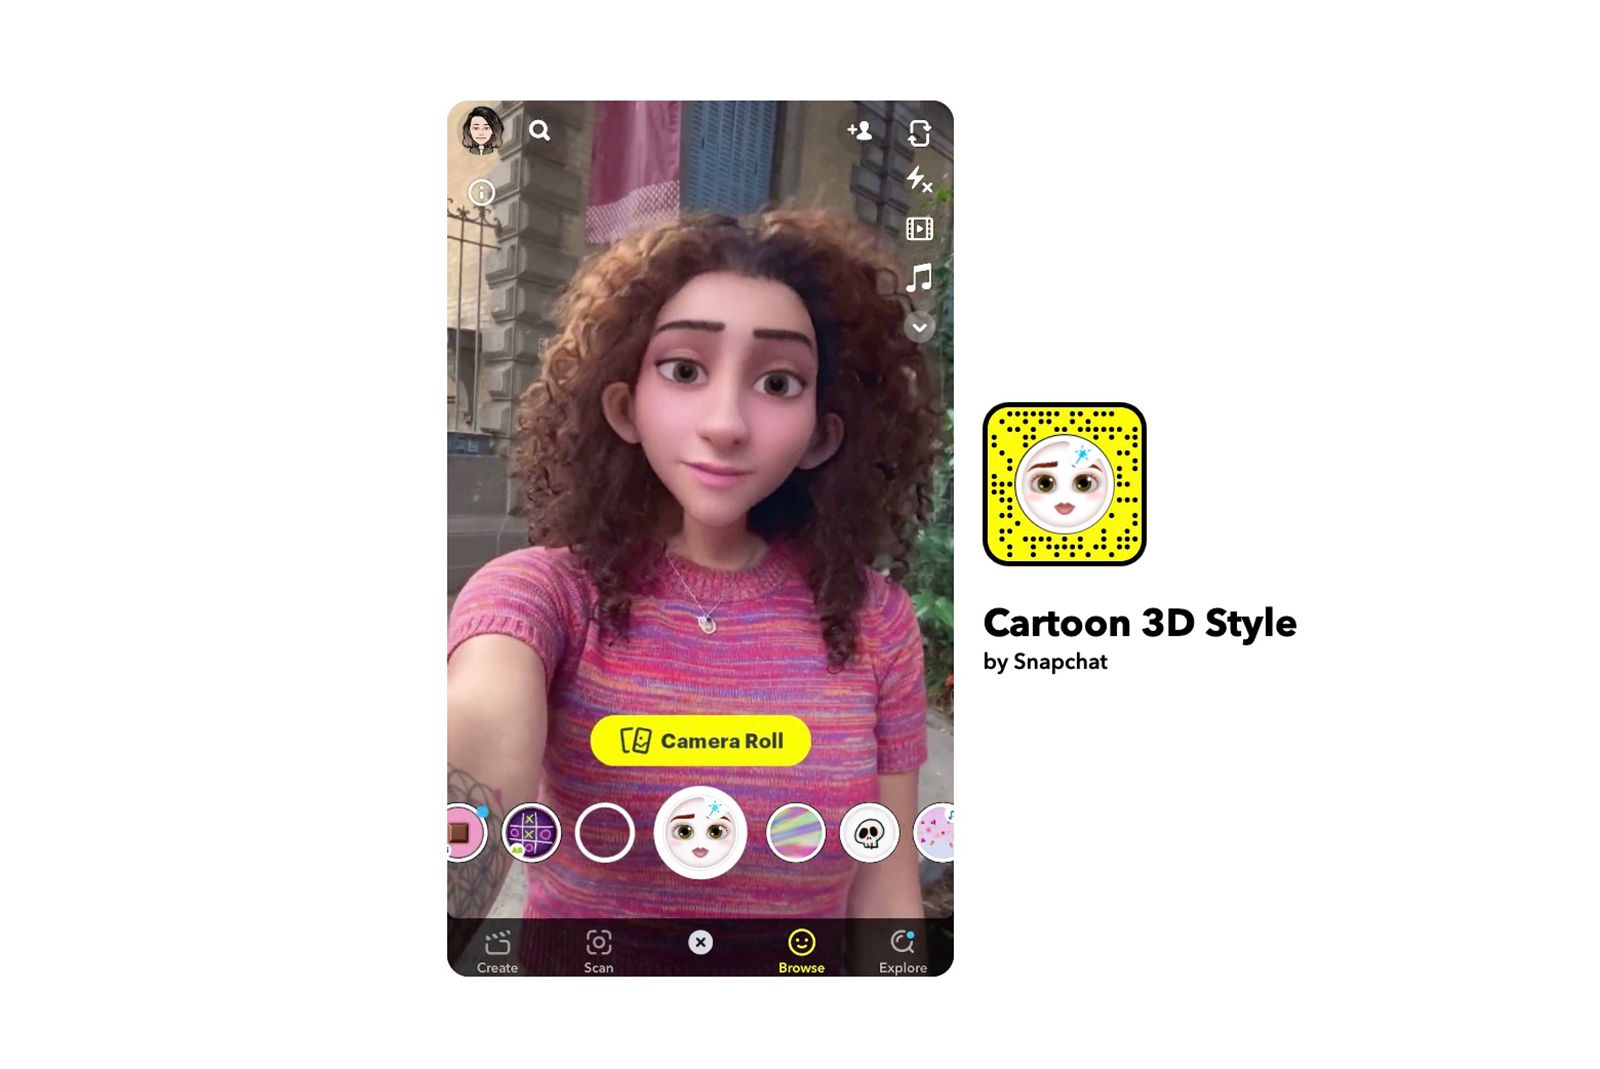 How to use Snapchat's cartoon filters: Turn yourself into a Disney character photo 4